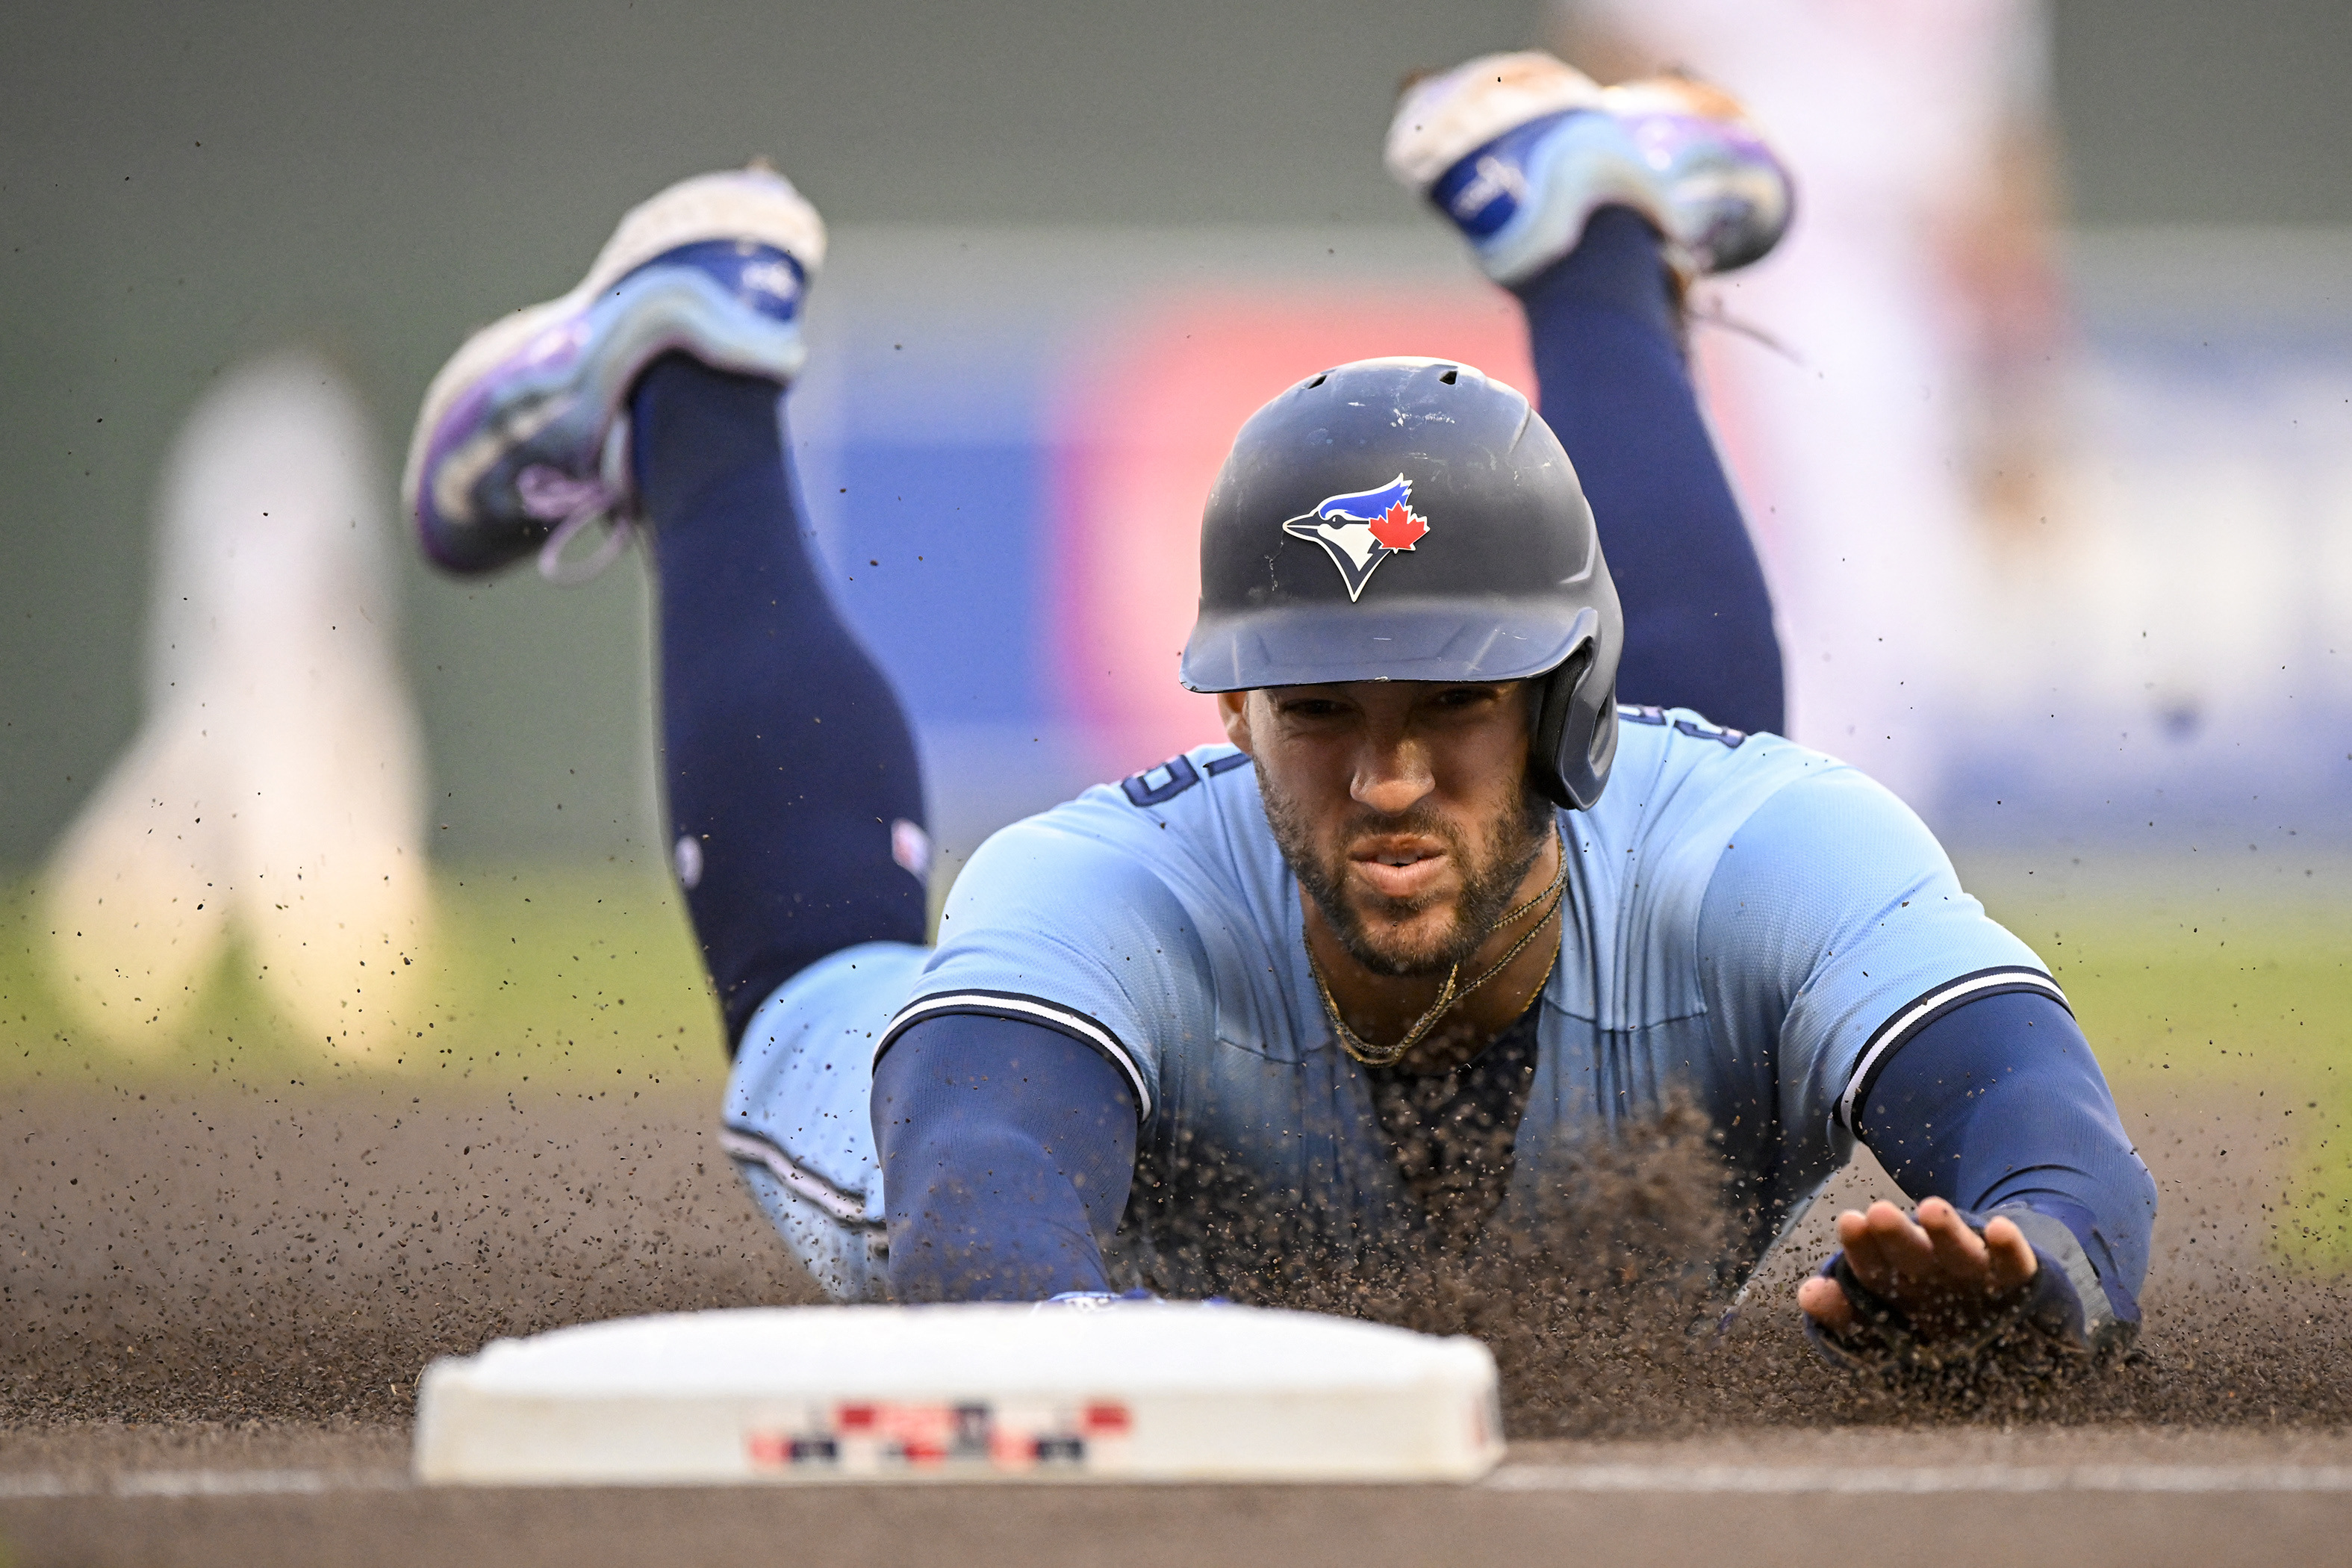 George Springer's two homers lift Blue Jays past Astros 2-1 - The